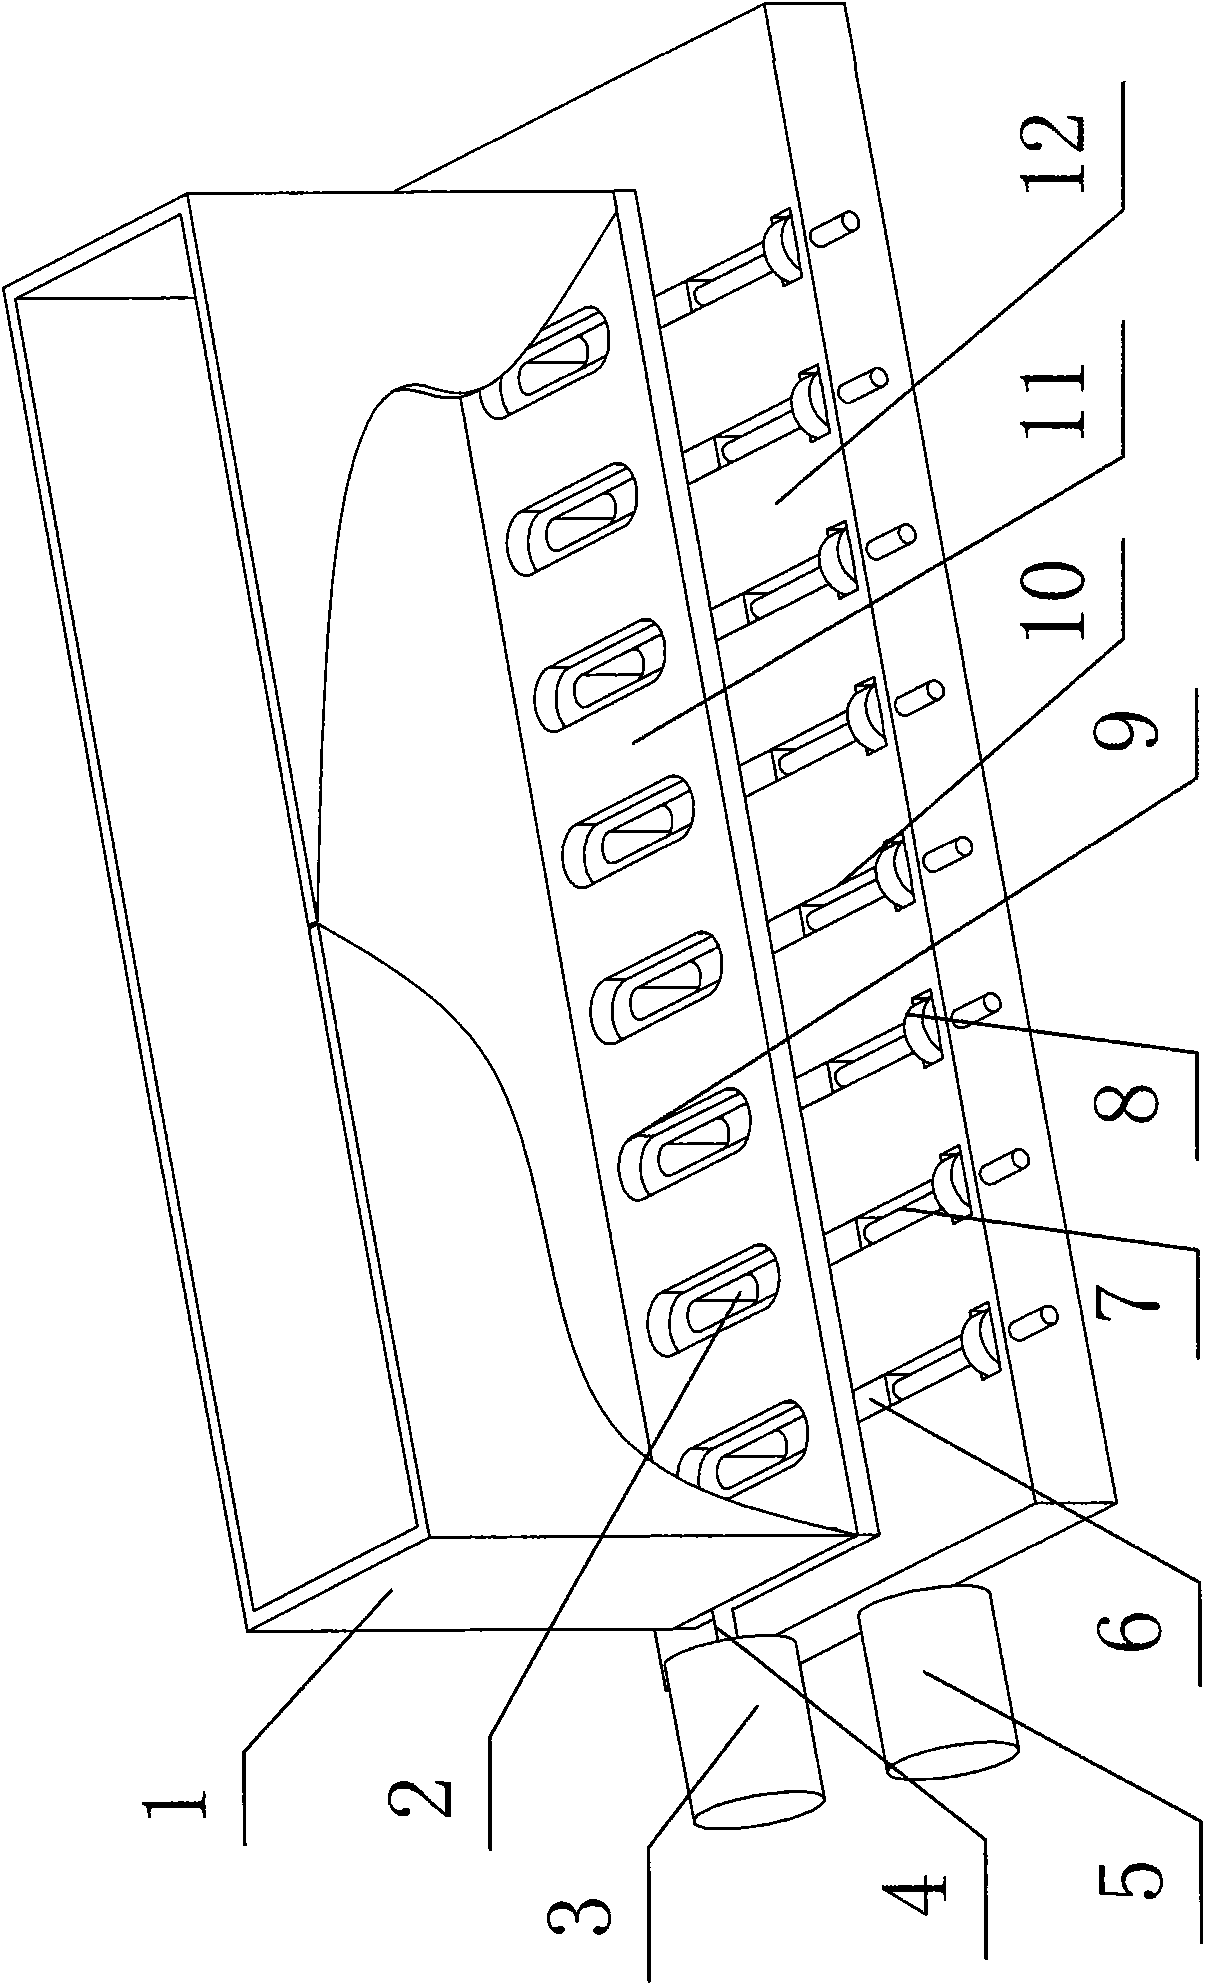 Shutter-style multiple row synchronous metering device